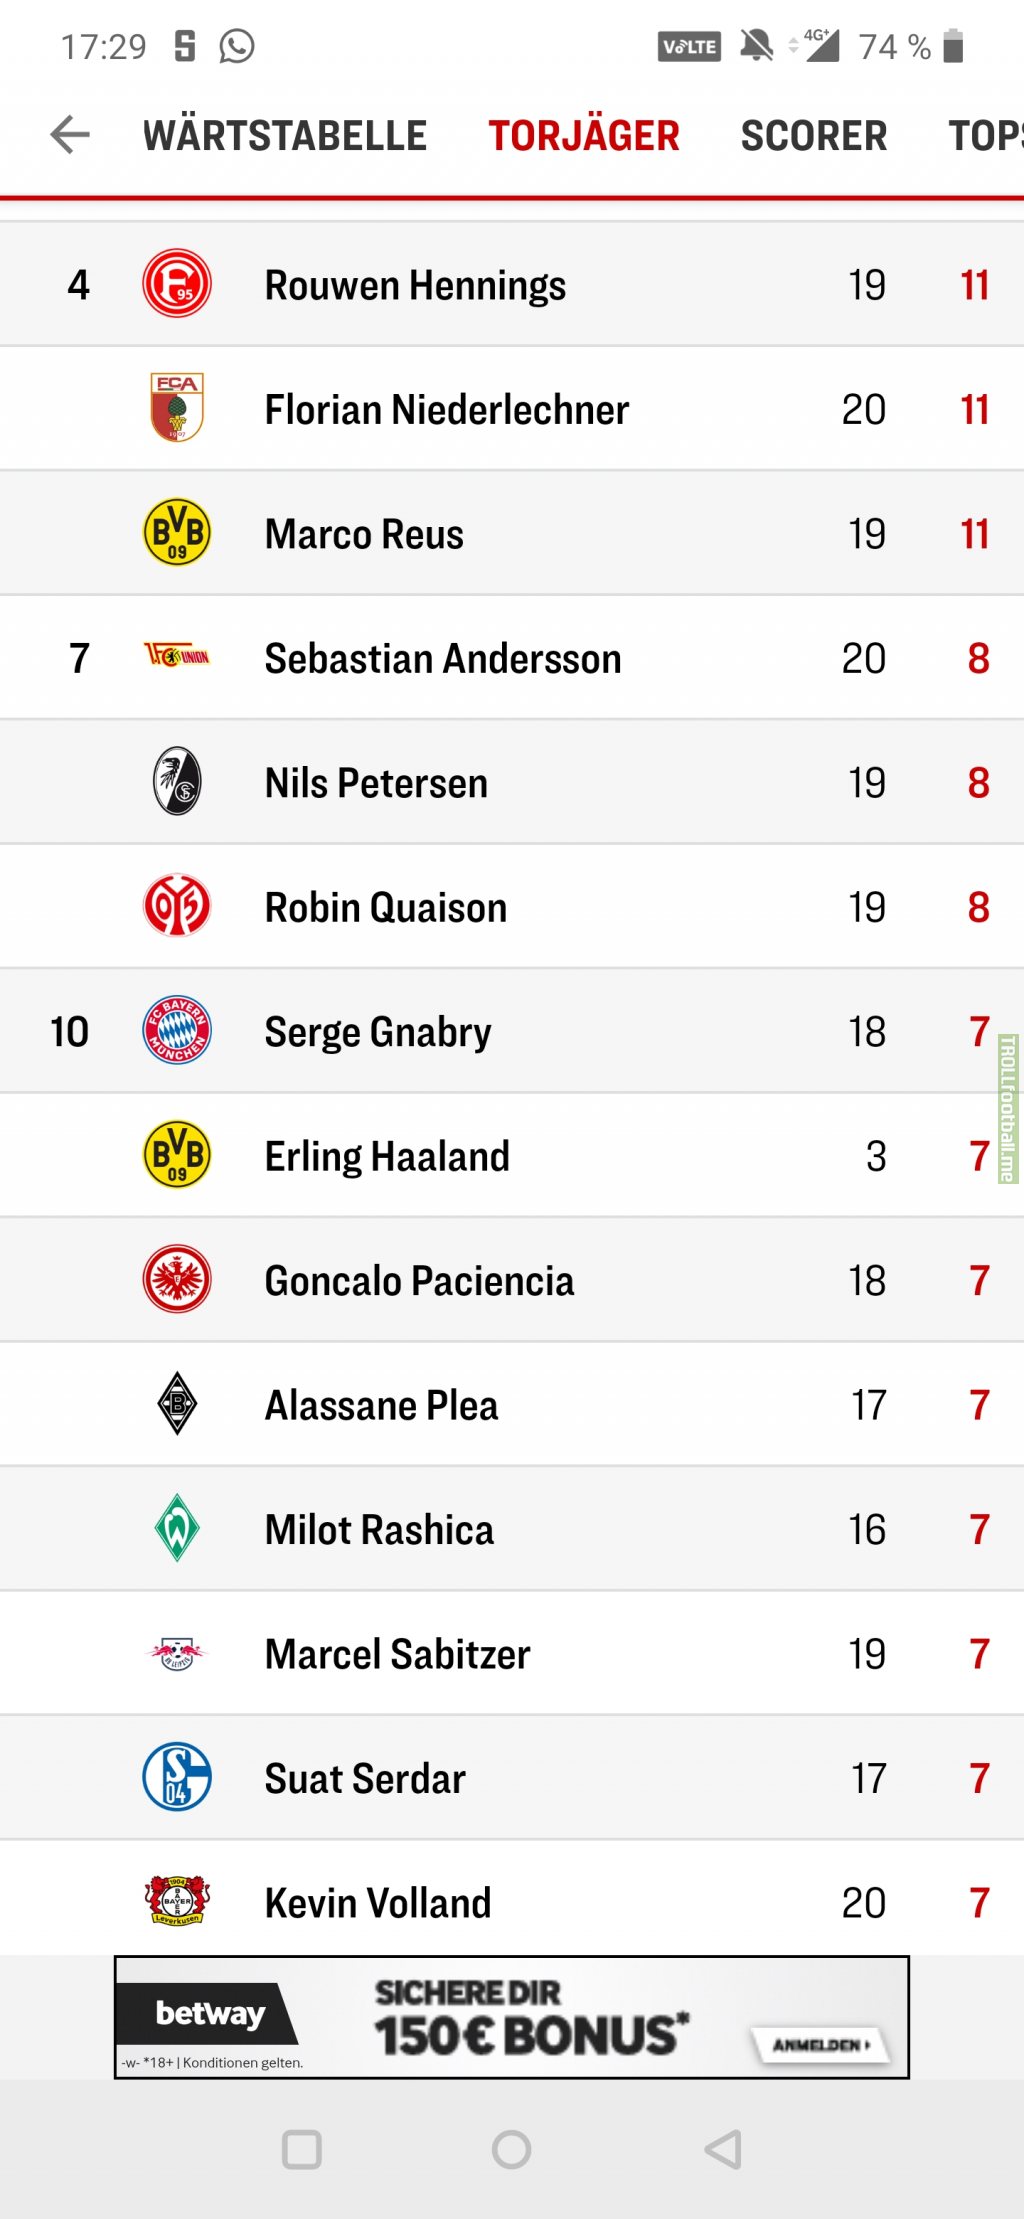 Erling Haaland is 10th right now in the Bundesliga top goalscorer table